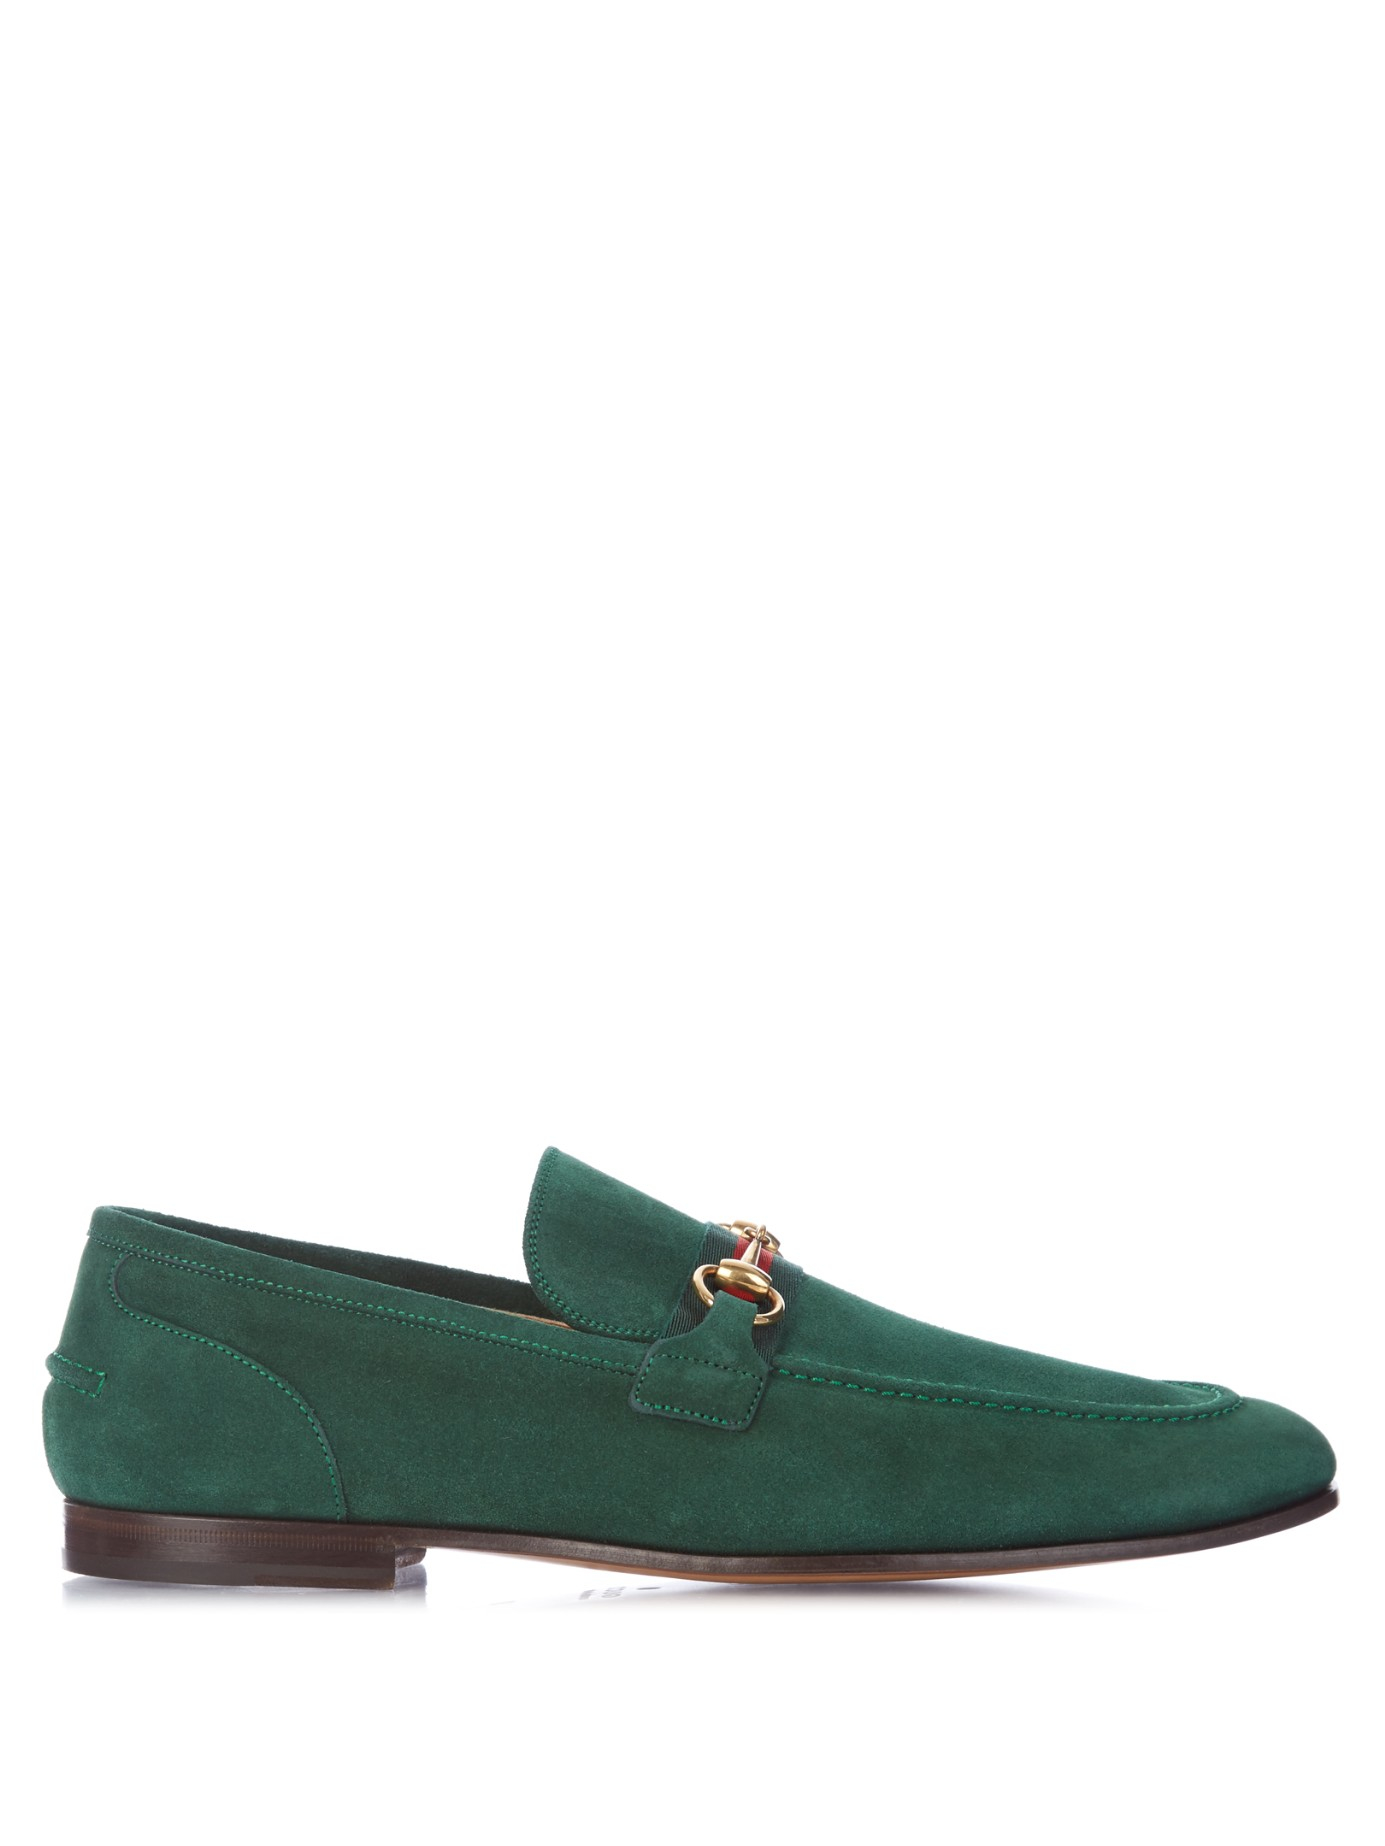 Gucci Horsebit Suede Loafers in Green for Men - Lyst